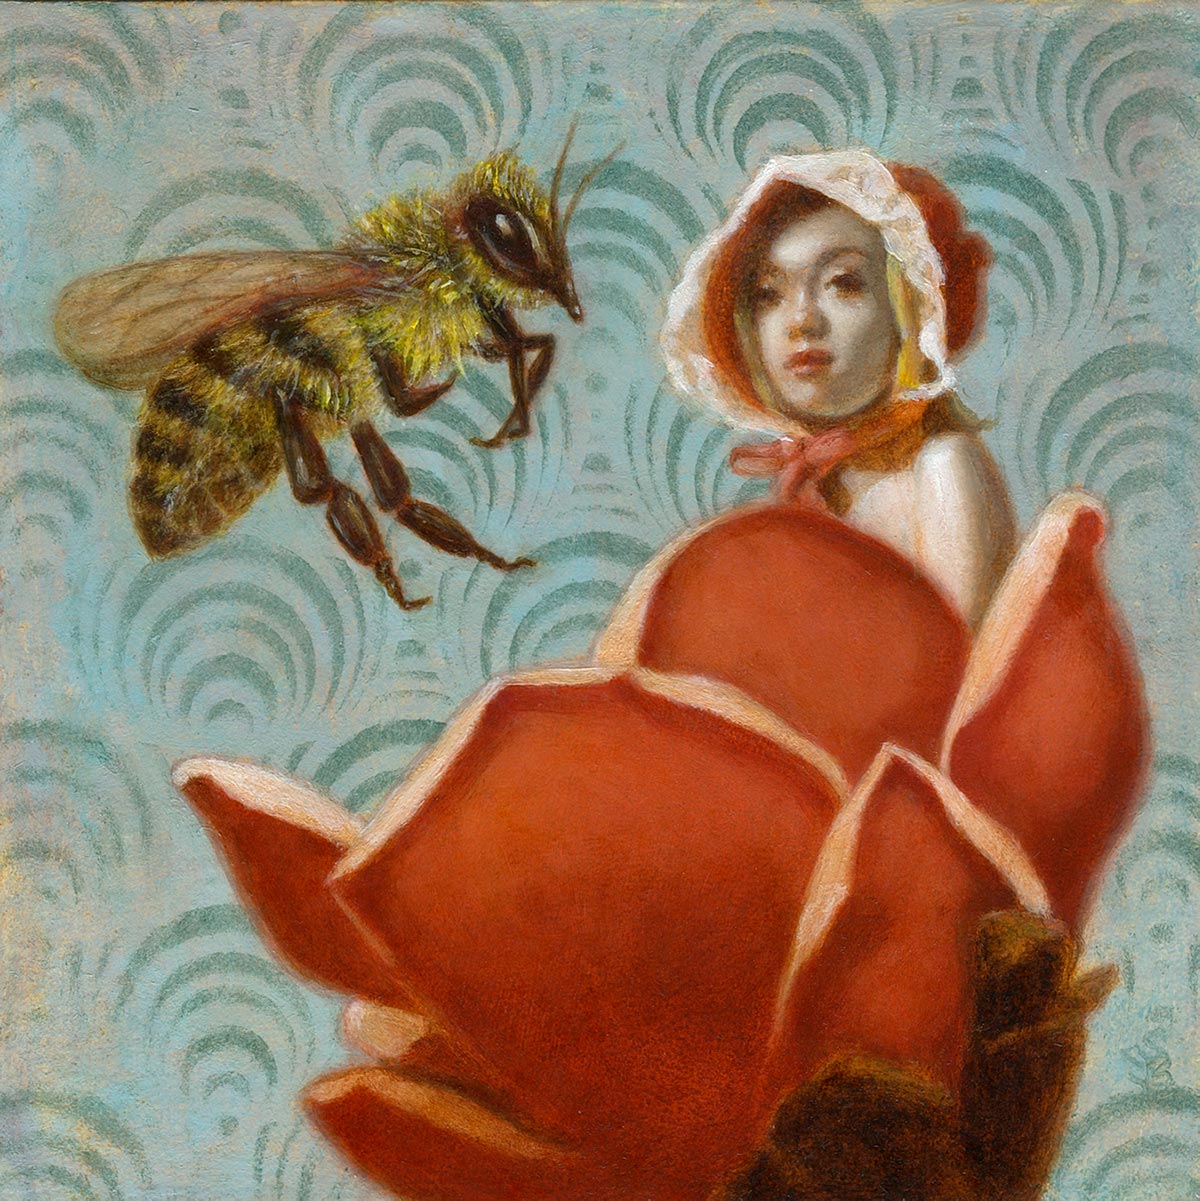 The Hive and The Honey